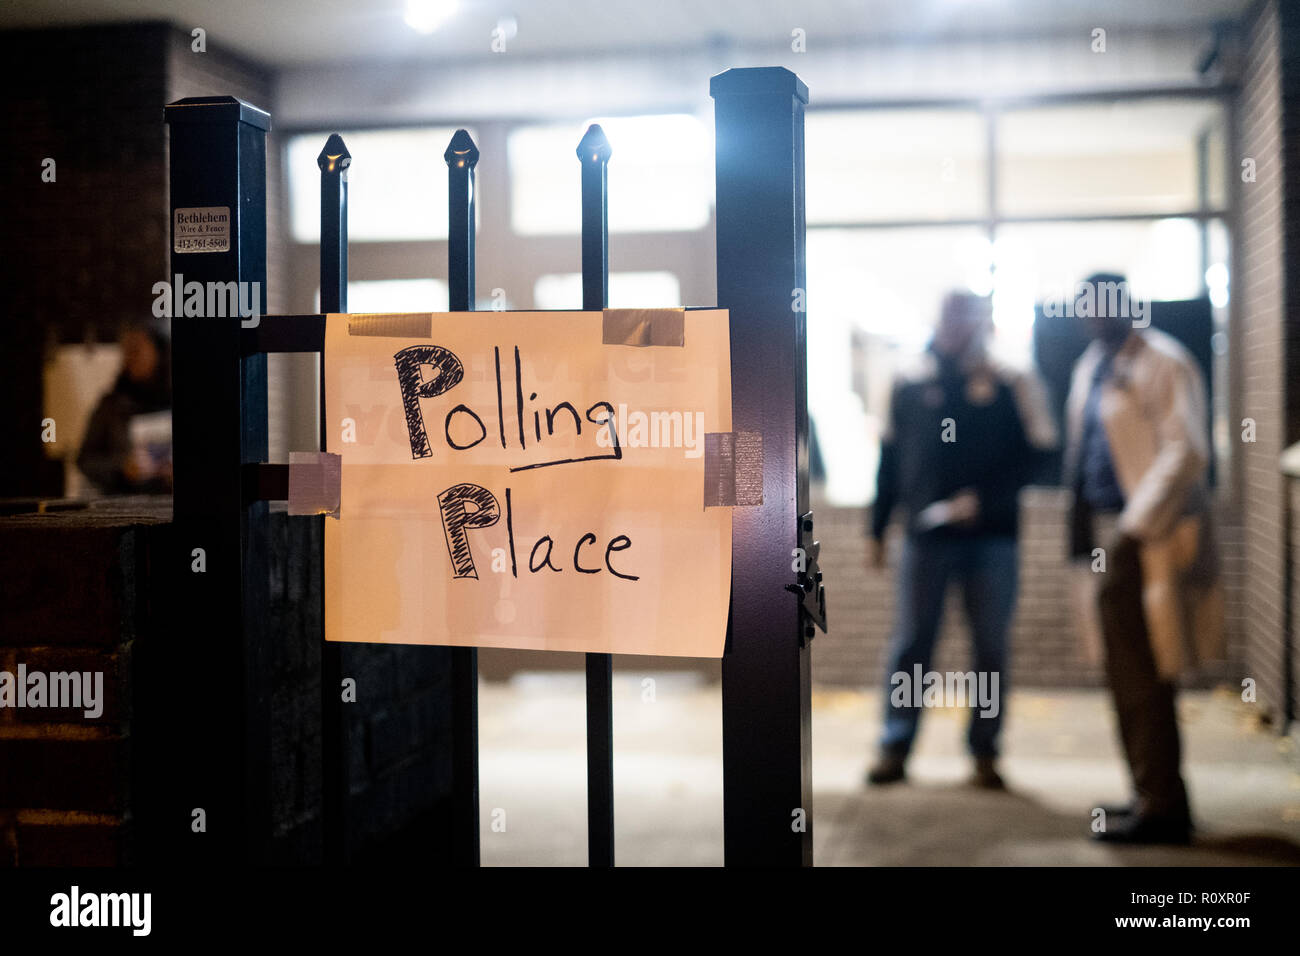 Polling place sign is seen at the entrance during the midterm elections in Pittsburgh, PA in the aftermath of the Tree of Life shootings. Stock Photo